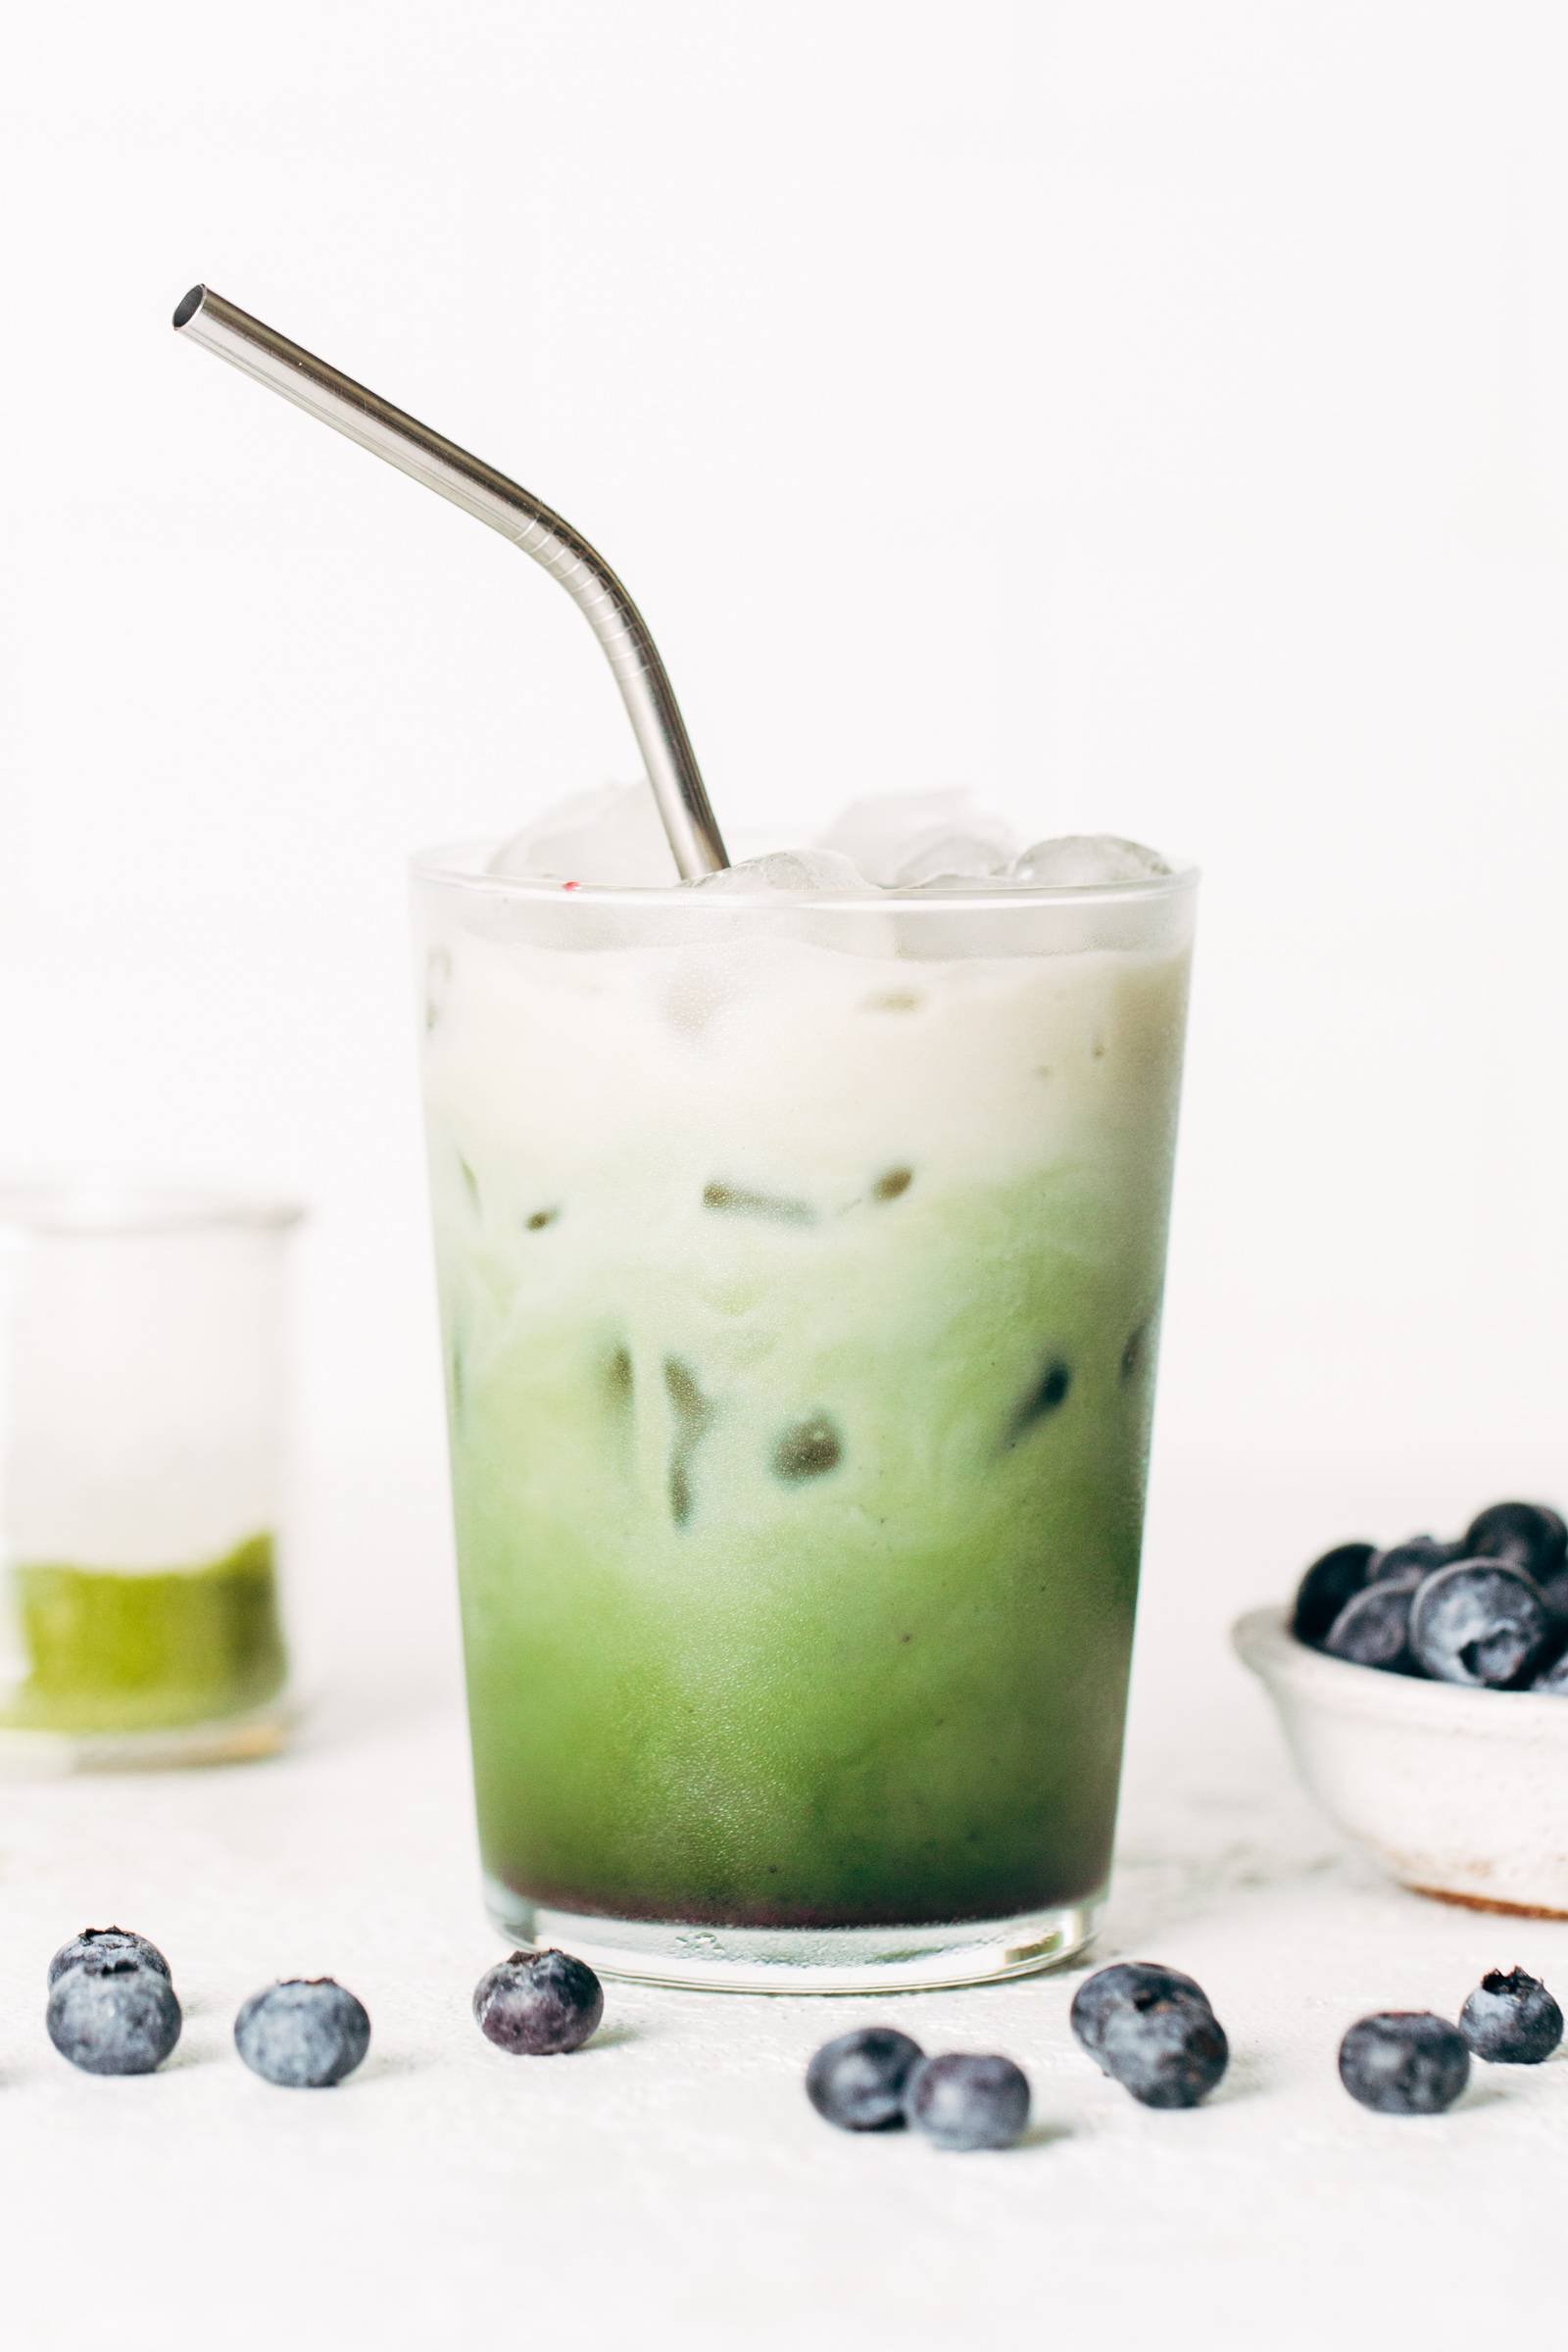 Blueberry matcha latte in a glass with a stainless steel straw